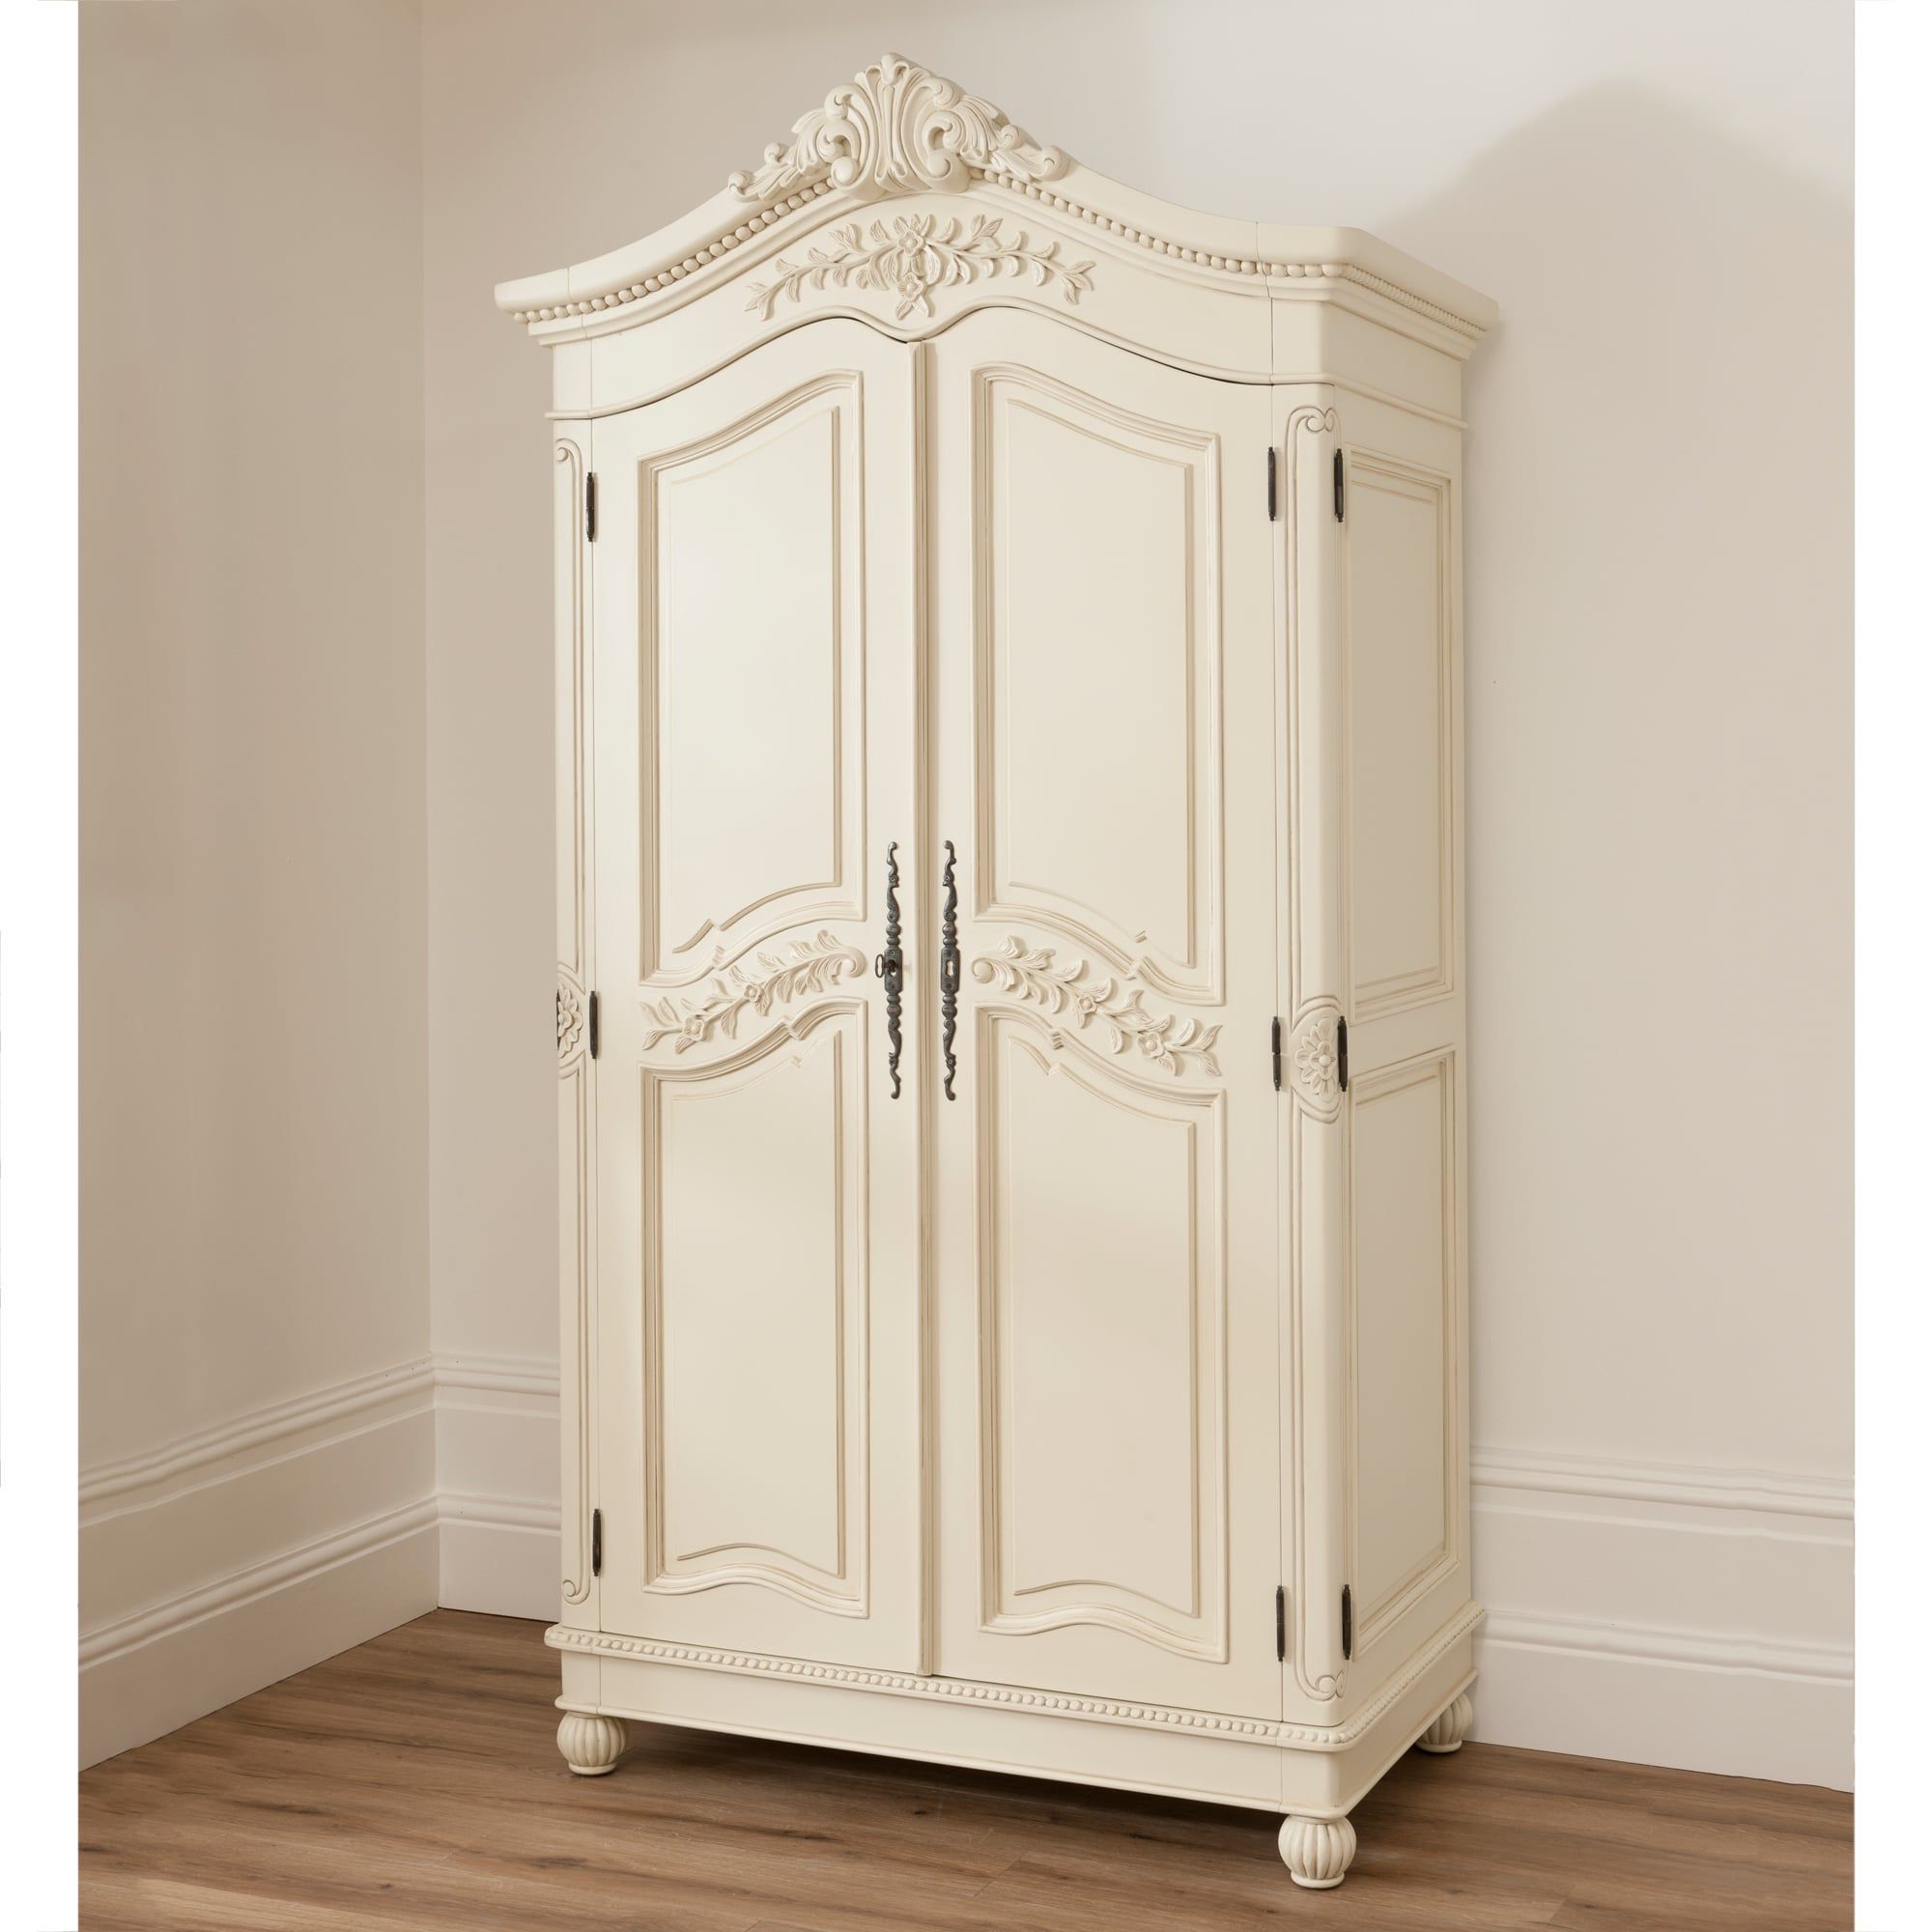 Shabby Chic Wardrobe For Your New Modern Lifestyle – Darbylanefurniture  | Shabby Chic Bathroom, Shabby Chic Curtains, Shabby Chic Wardrobe In Shabby Chic Wardrobes (View 8 of 20)